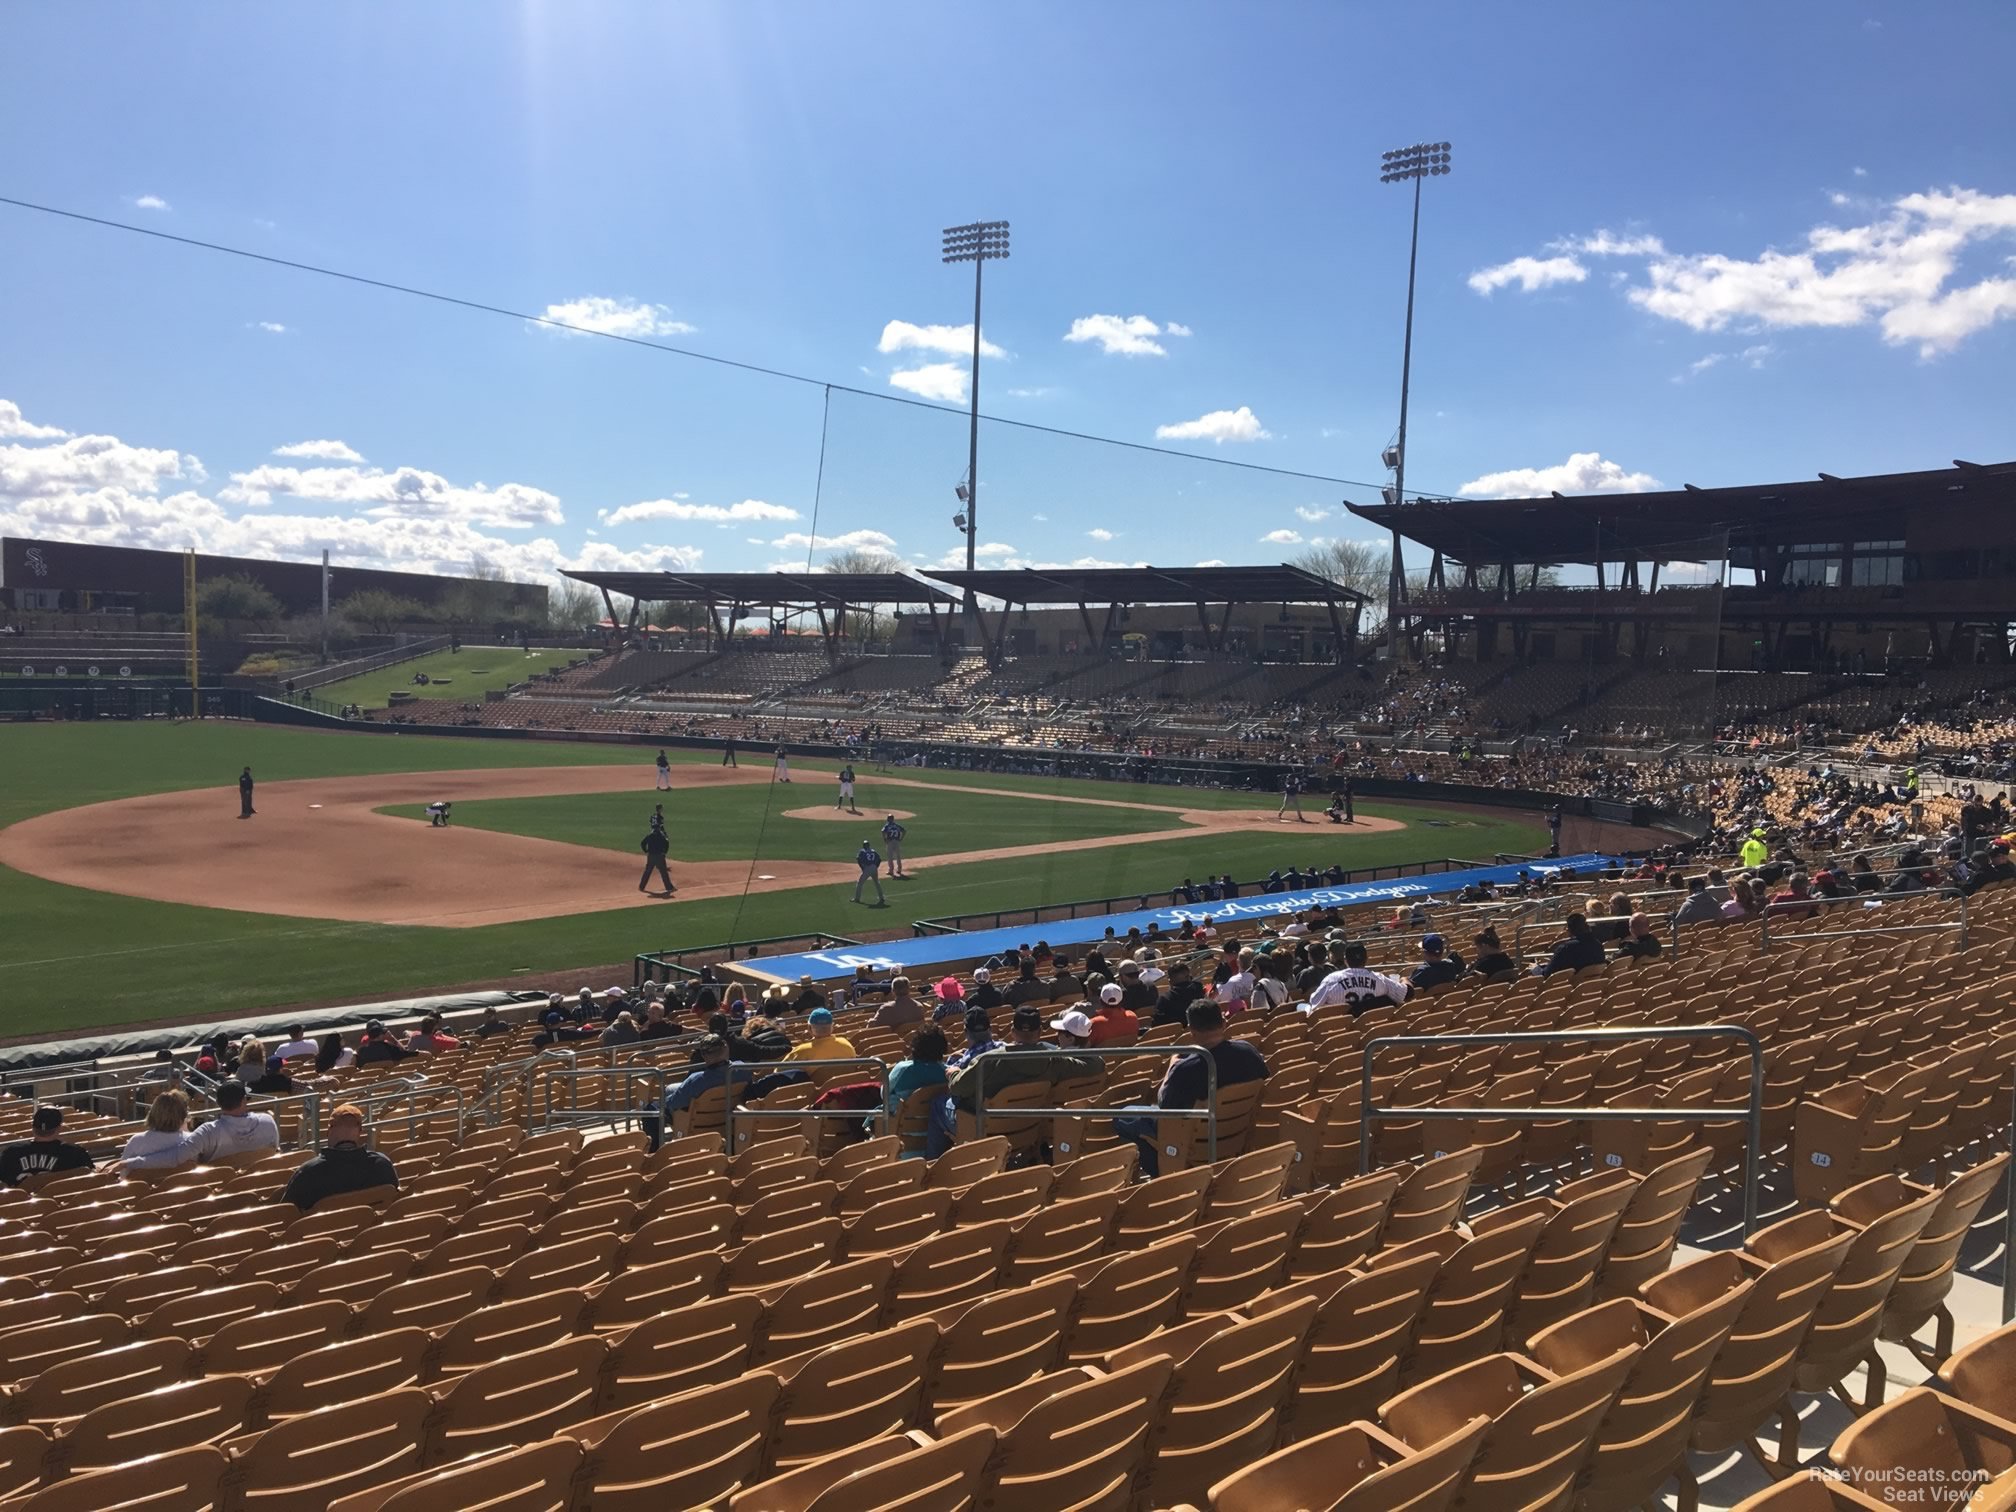 section 126, row 19 seat view  - camelback ranch